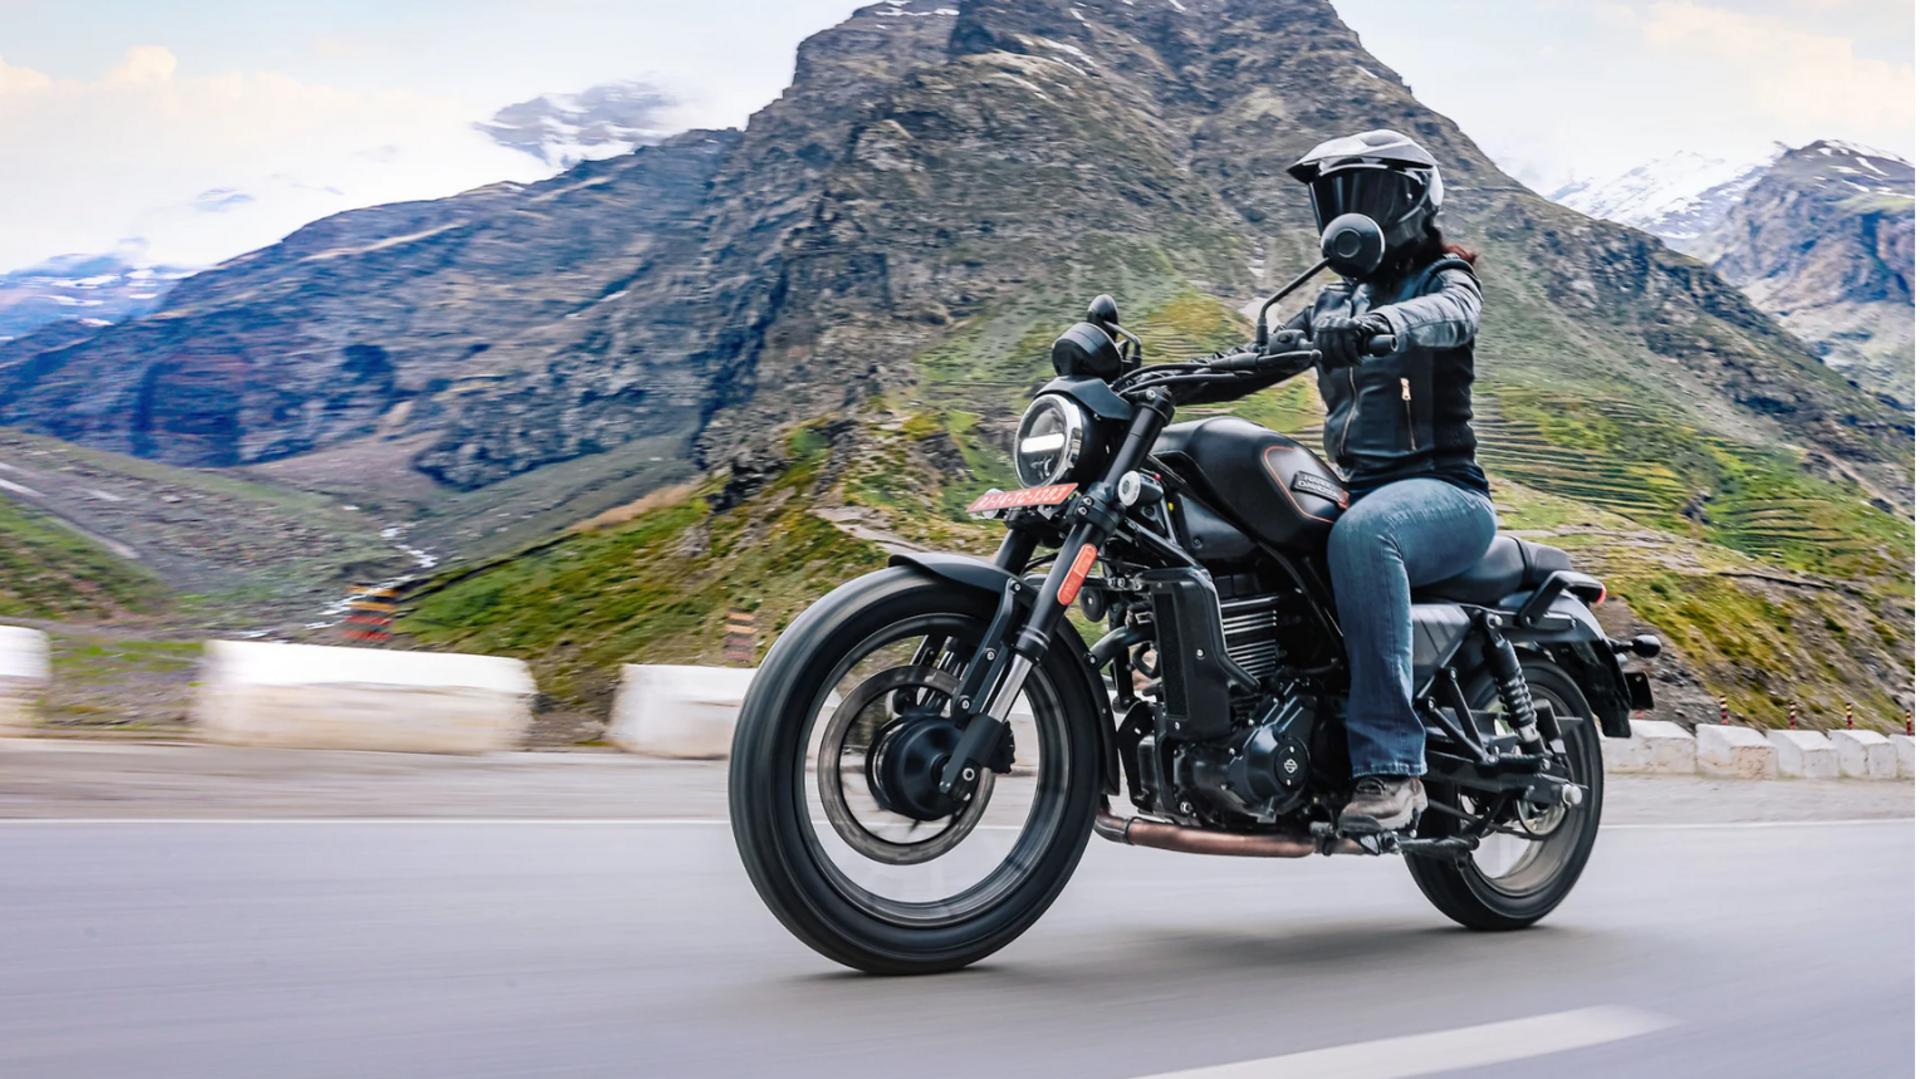 Harley-Davidson X 440 becomes costlier in India: Check new price